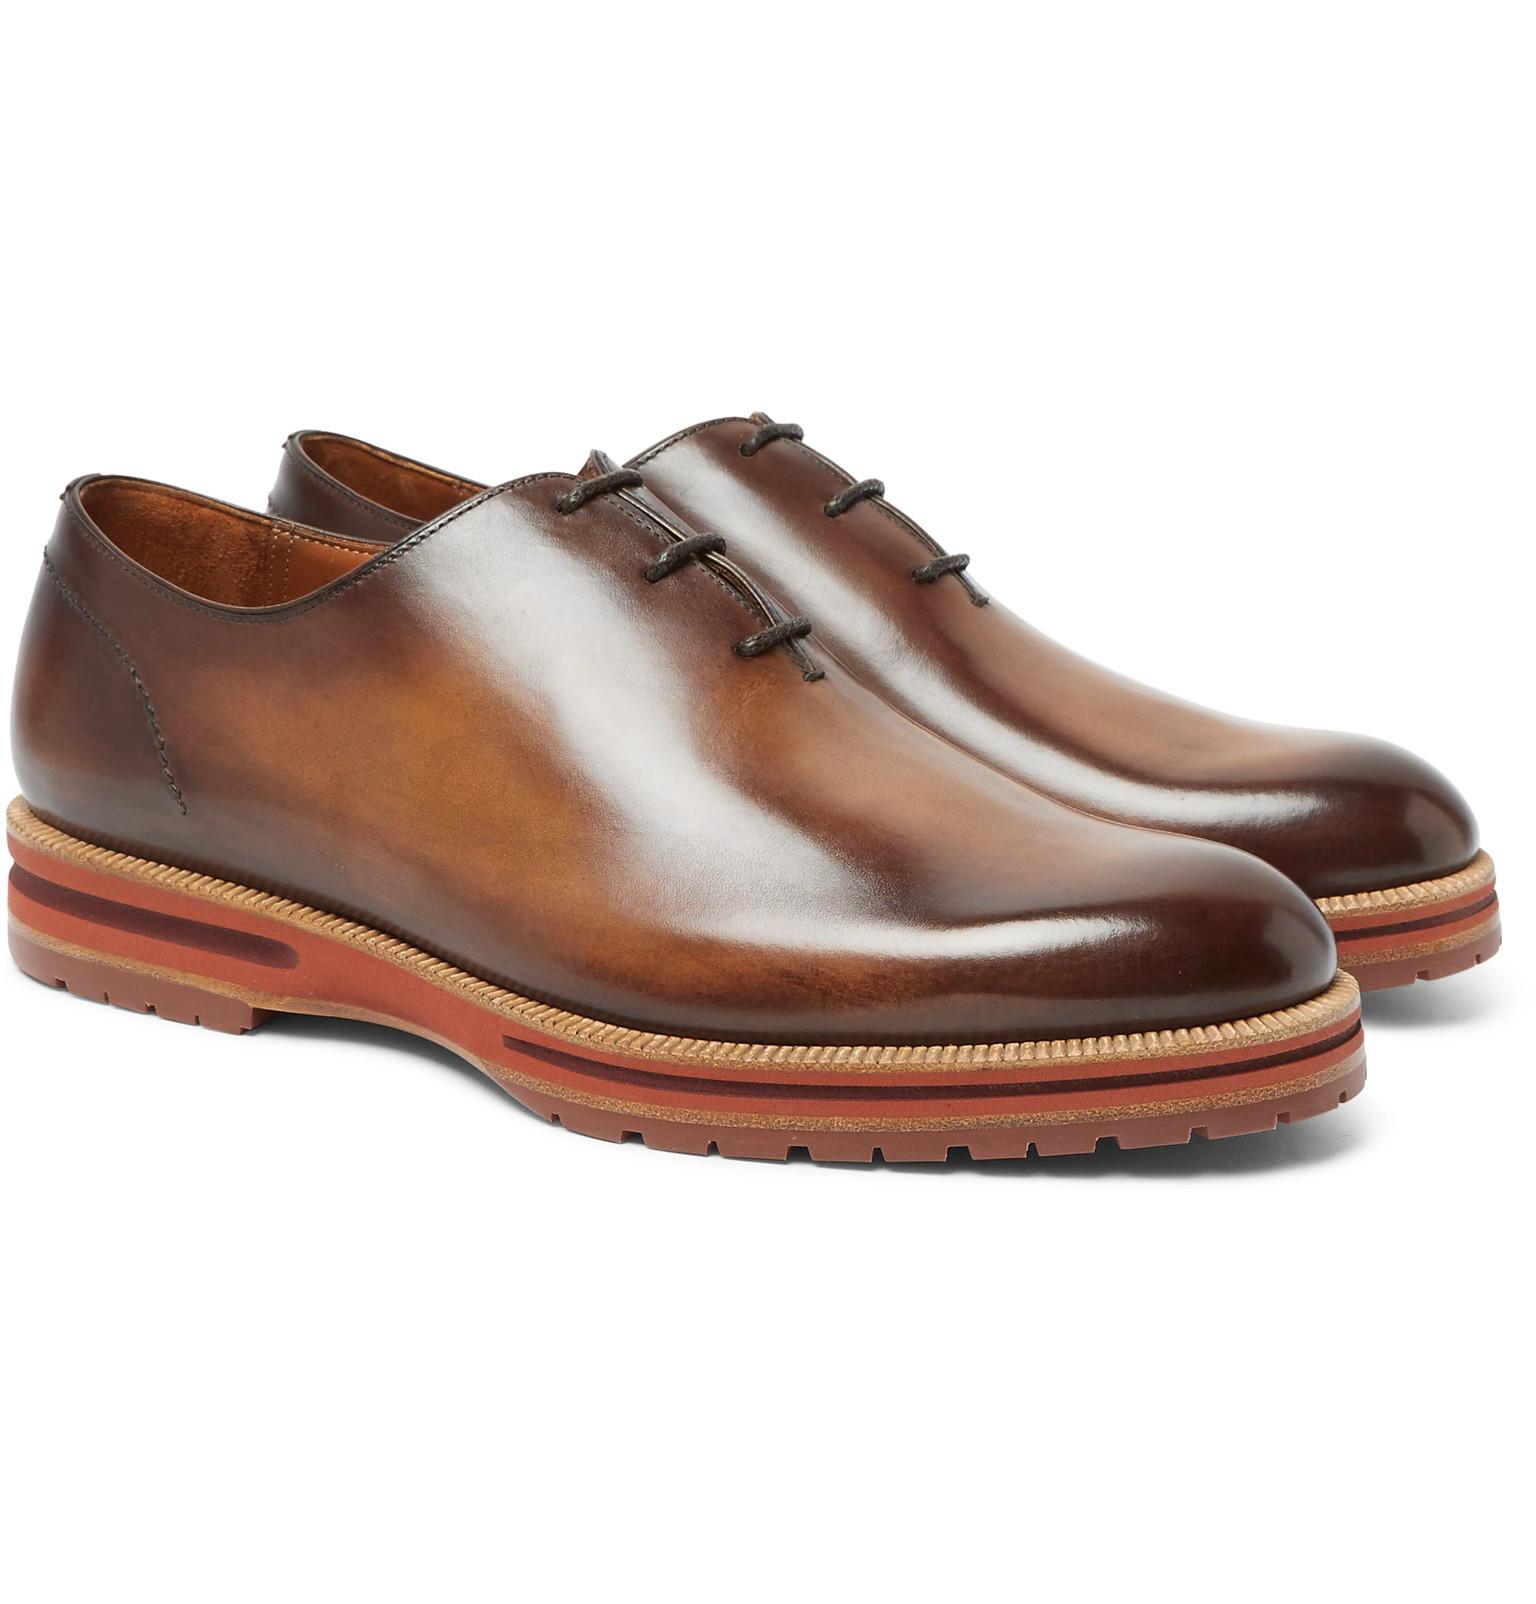 Lyst - Berluti Alessio Whole-cut Leather Oxford Shoes in Brown for Men